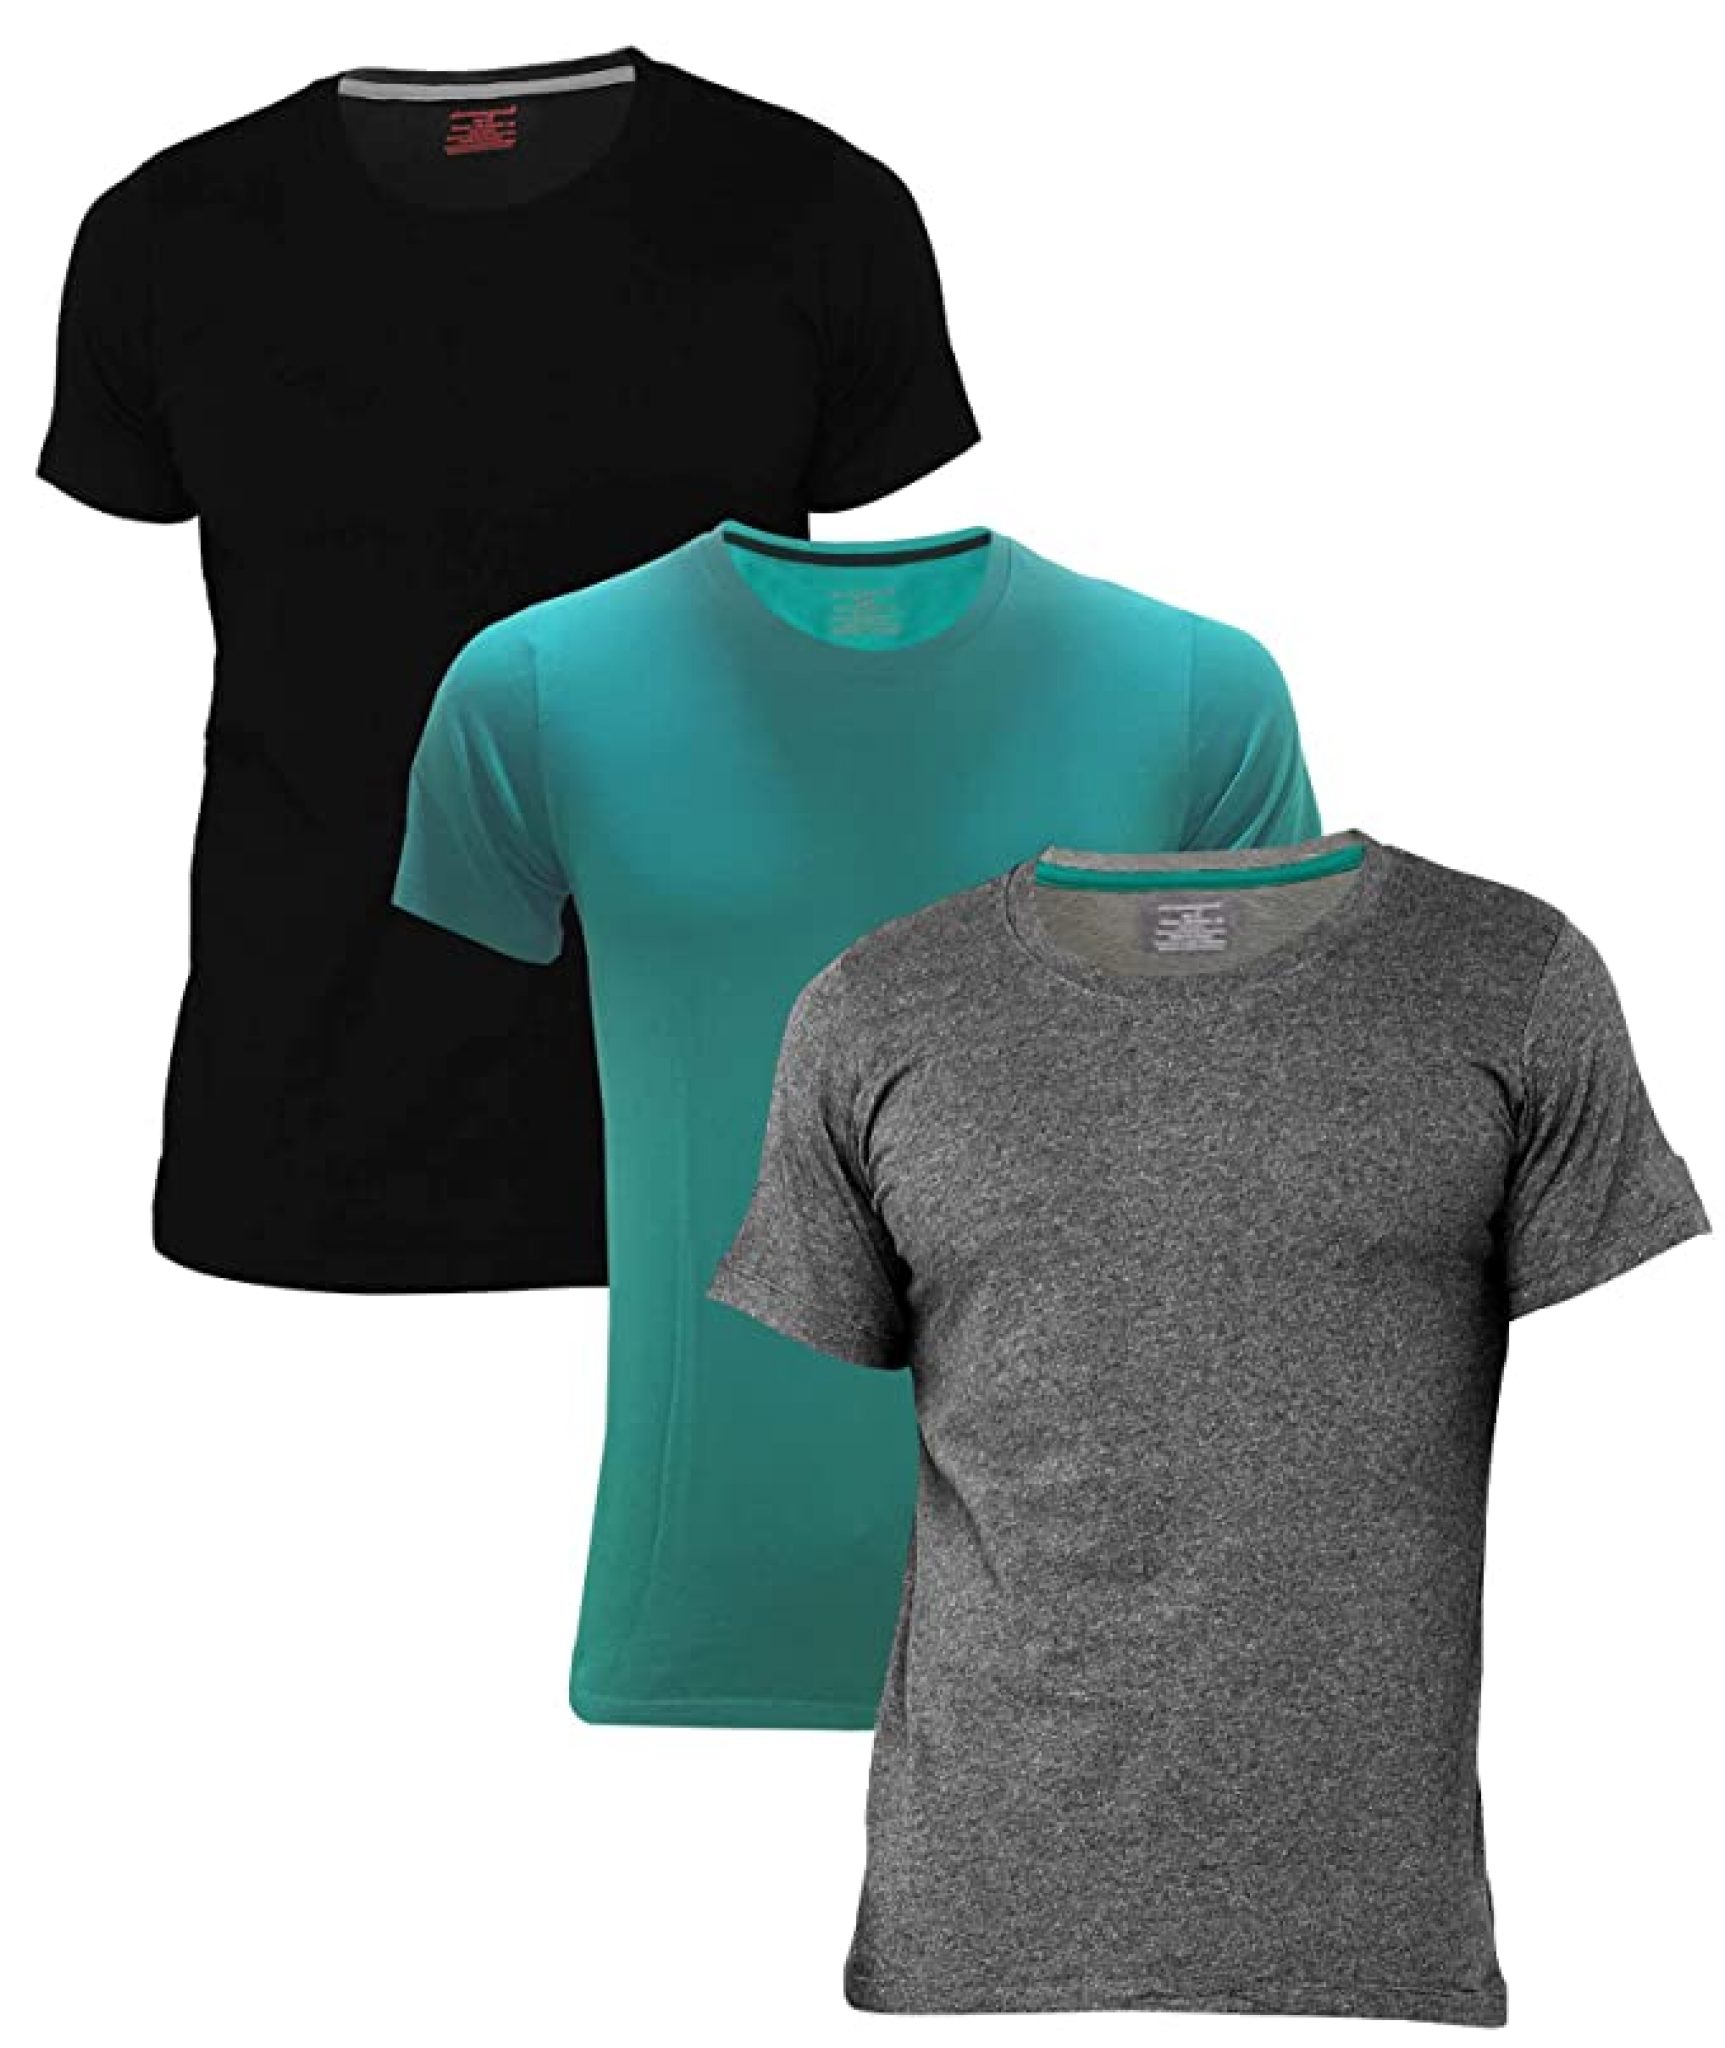 Men's Plain Regular Fit T-Shirt by Chromozome (Pack Of 3 Combo) - Price ...